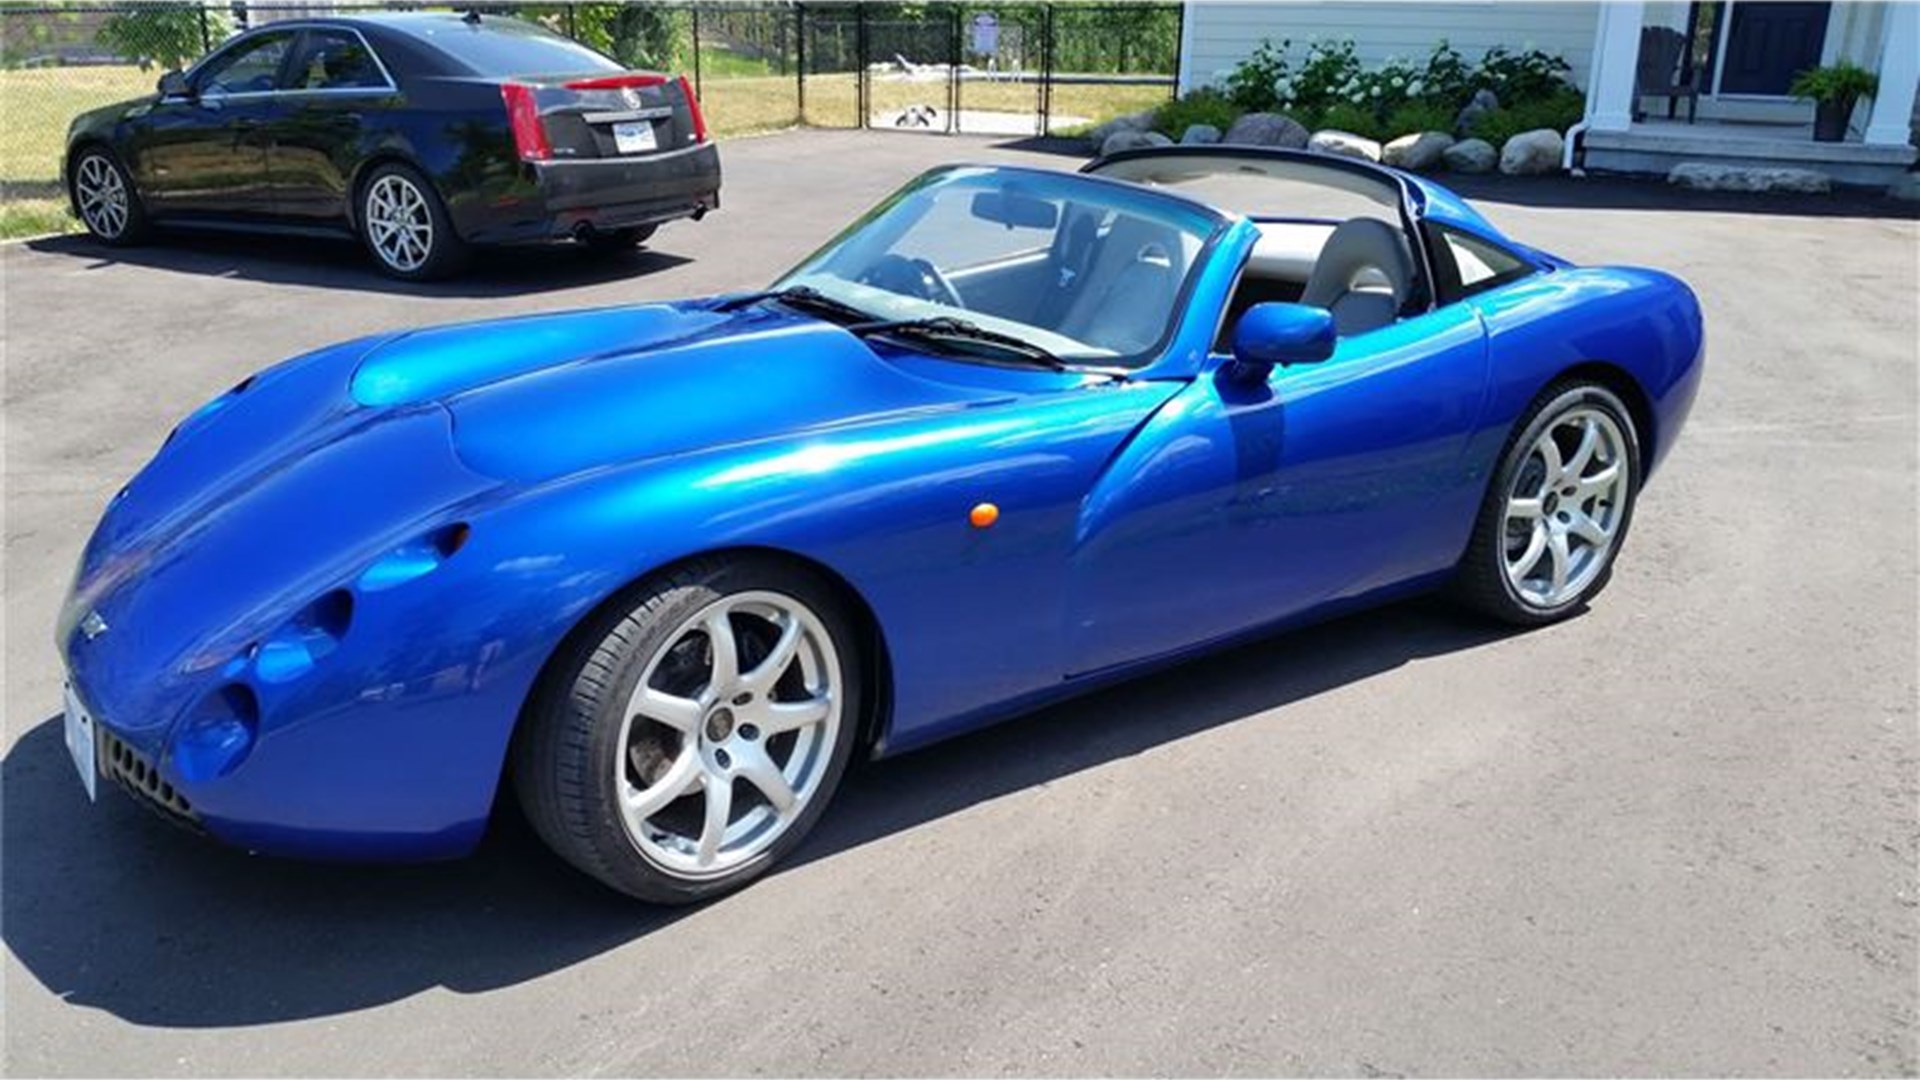 Find of the Week: 2001 TVR Tuscan.